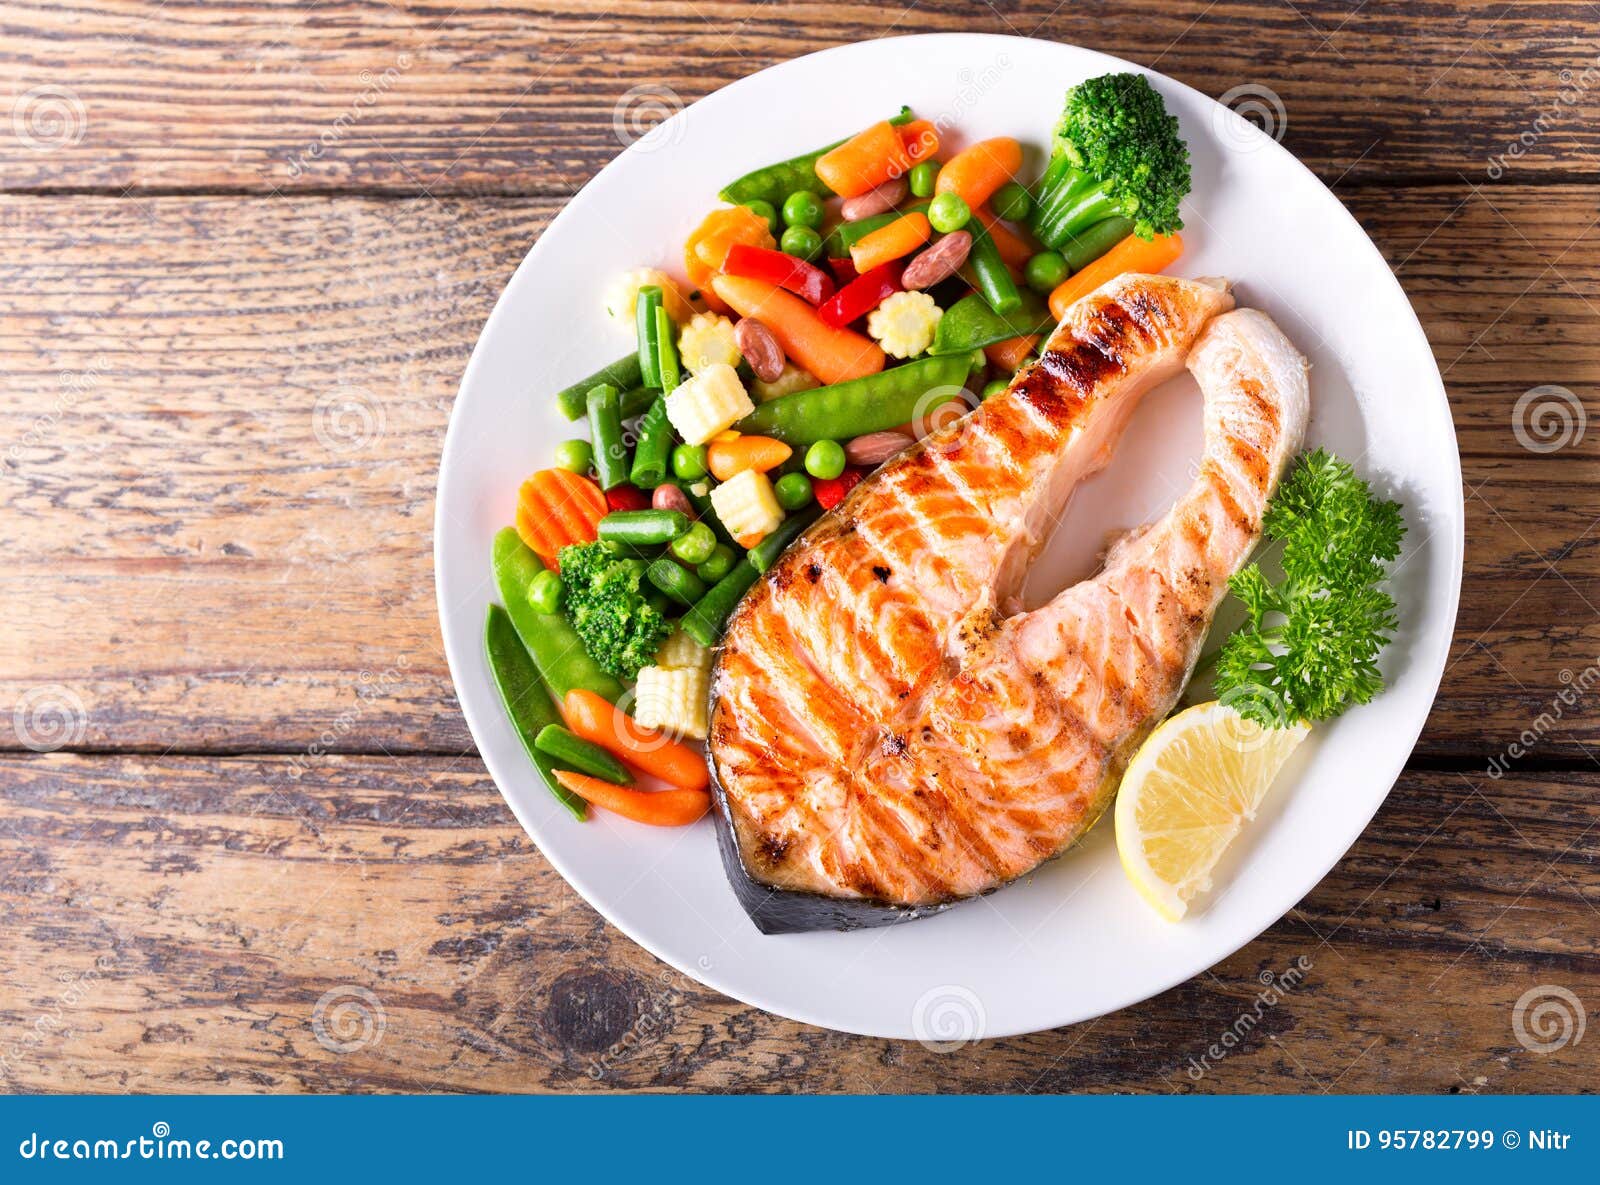 Plate of Grilled Salmon Steak with Vegetables Stock Image - Image of ...